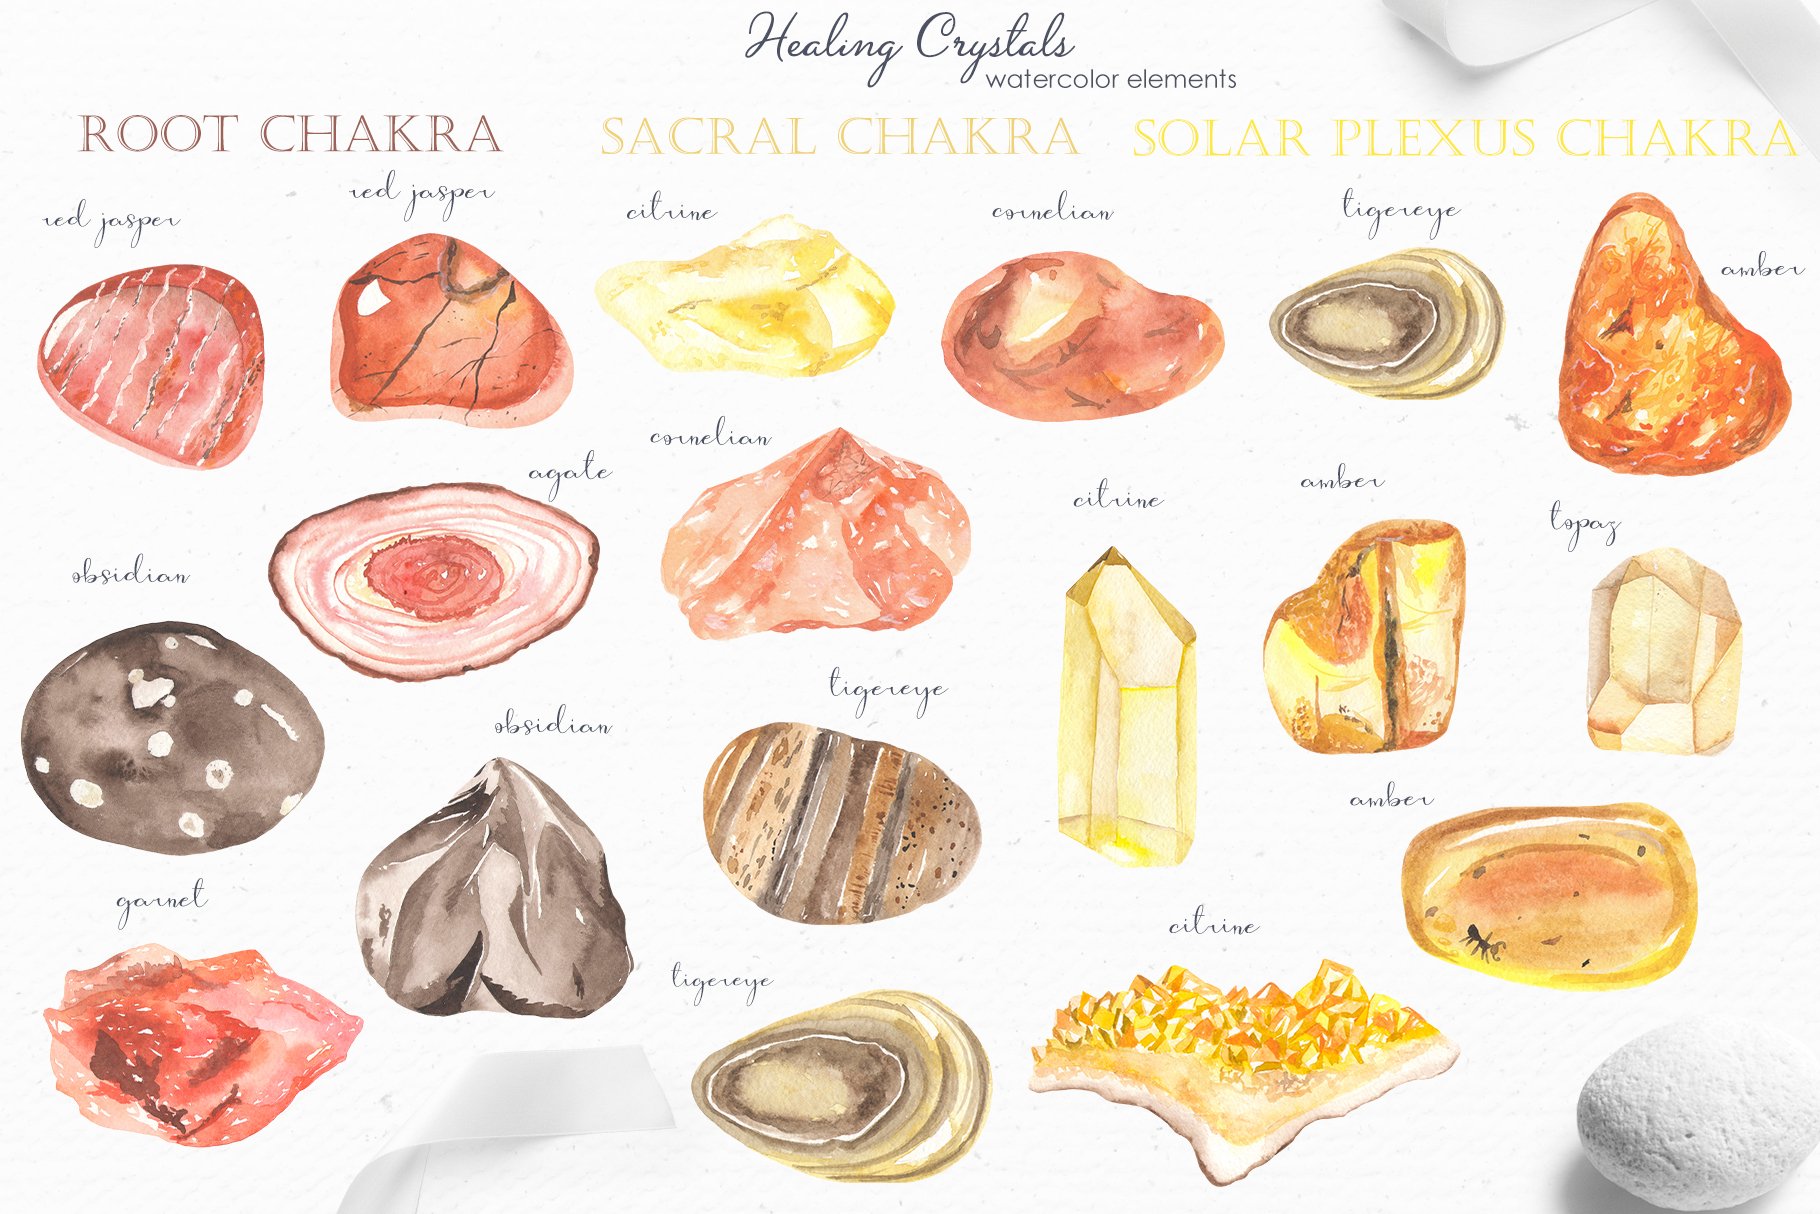 Healing crystals watercolor preview image.